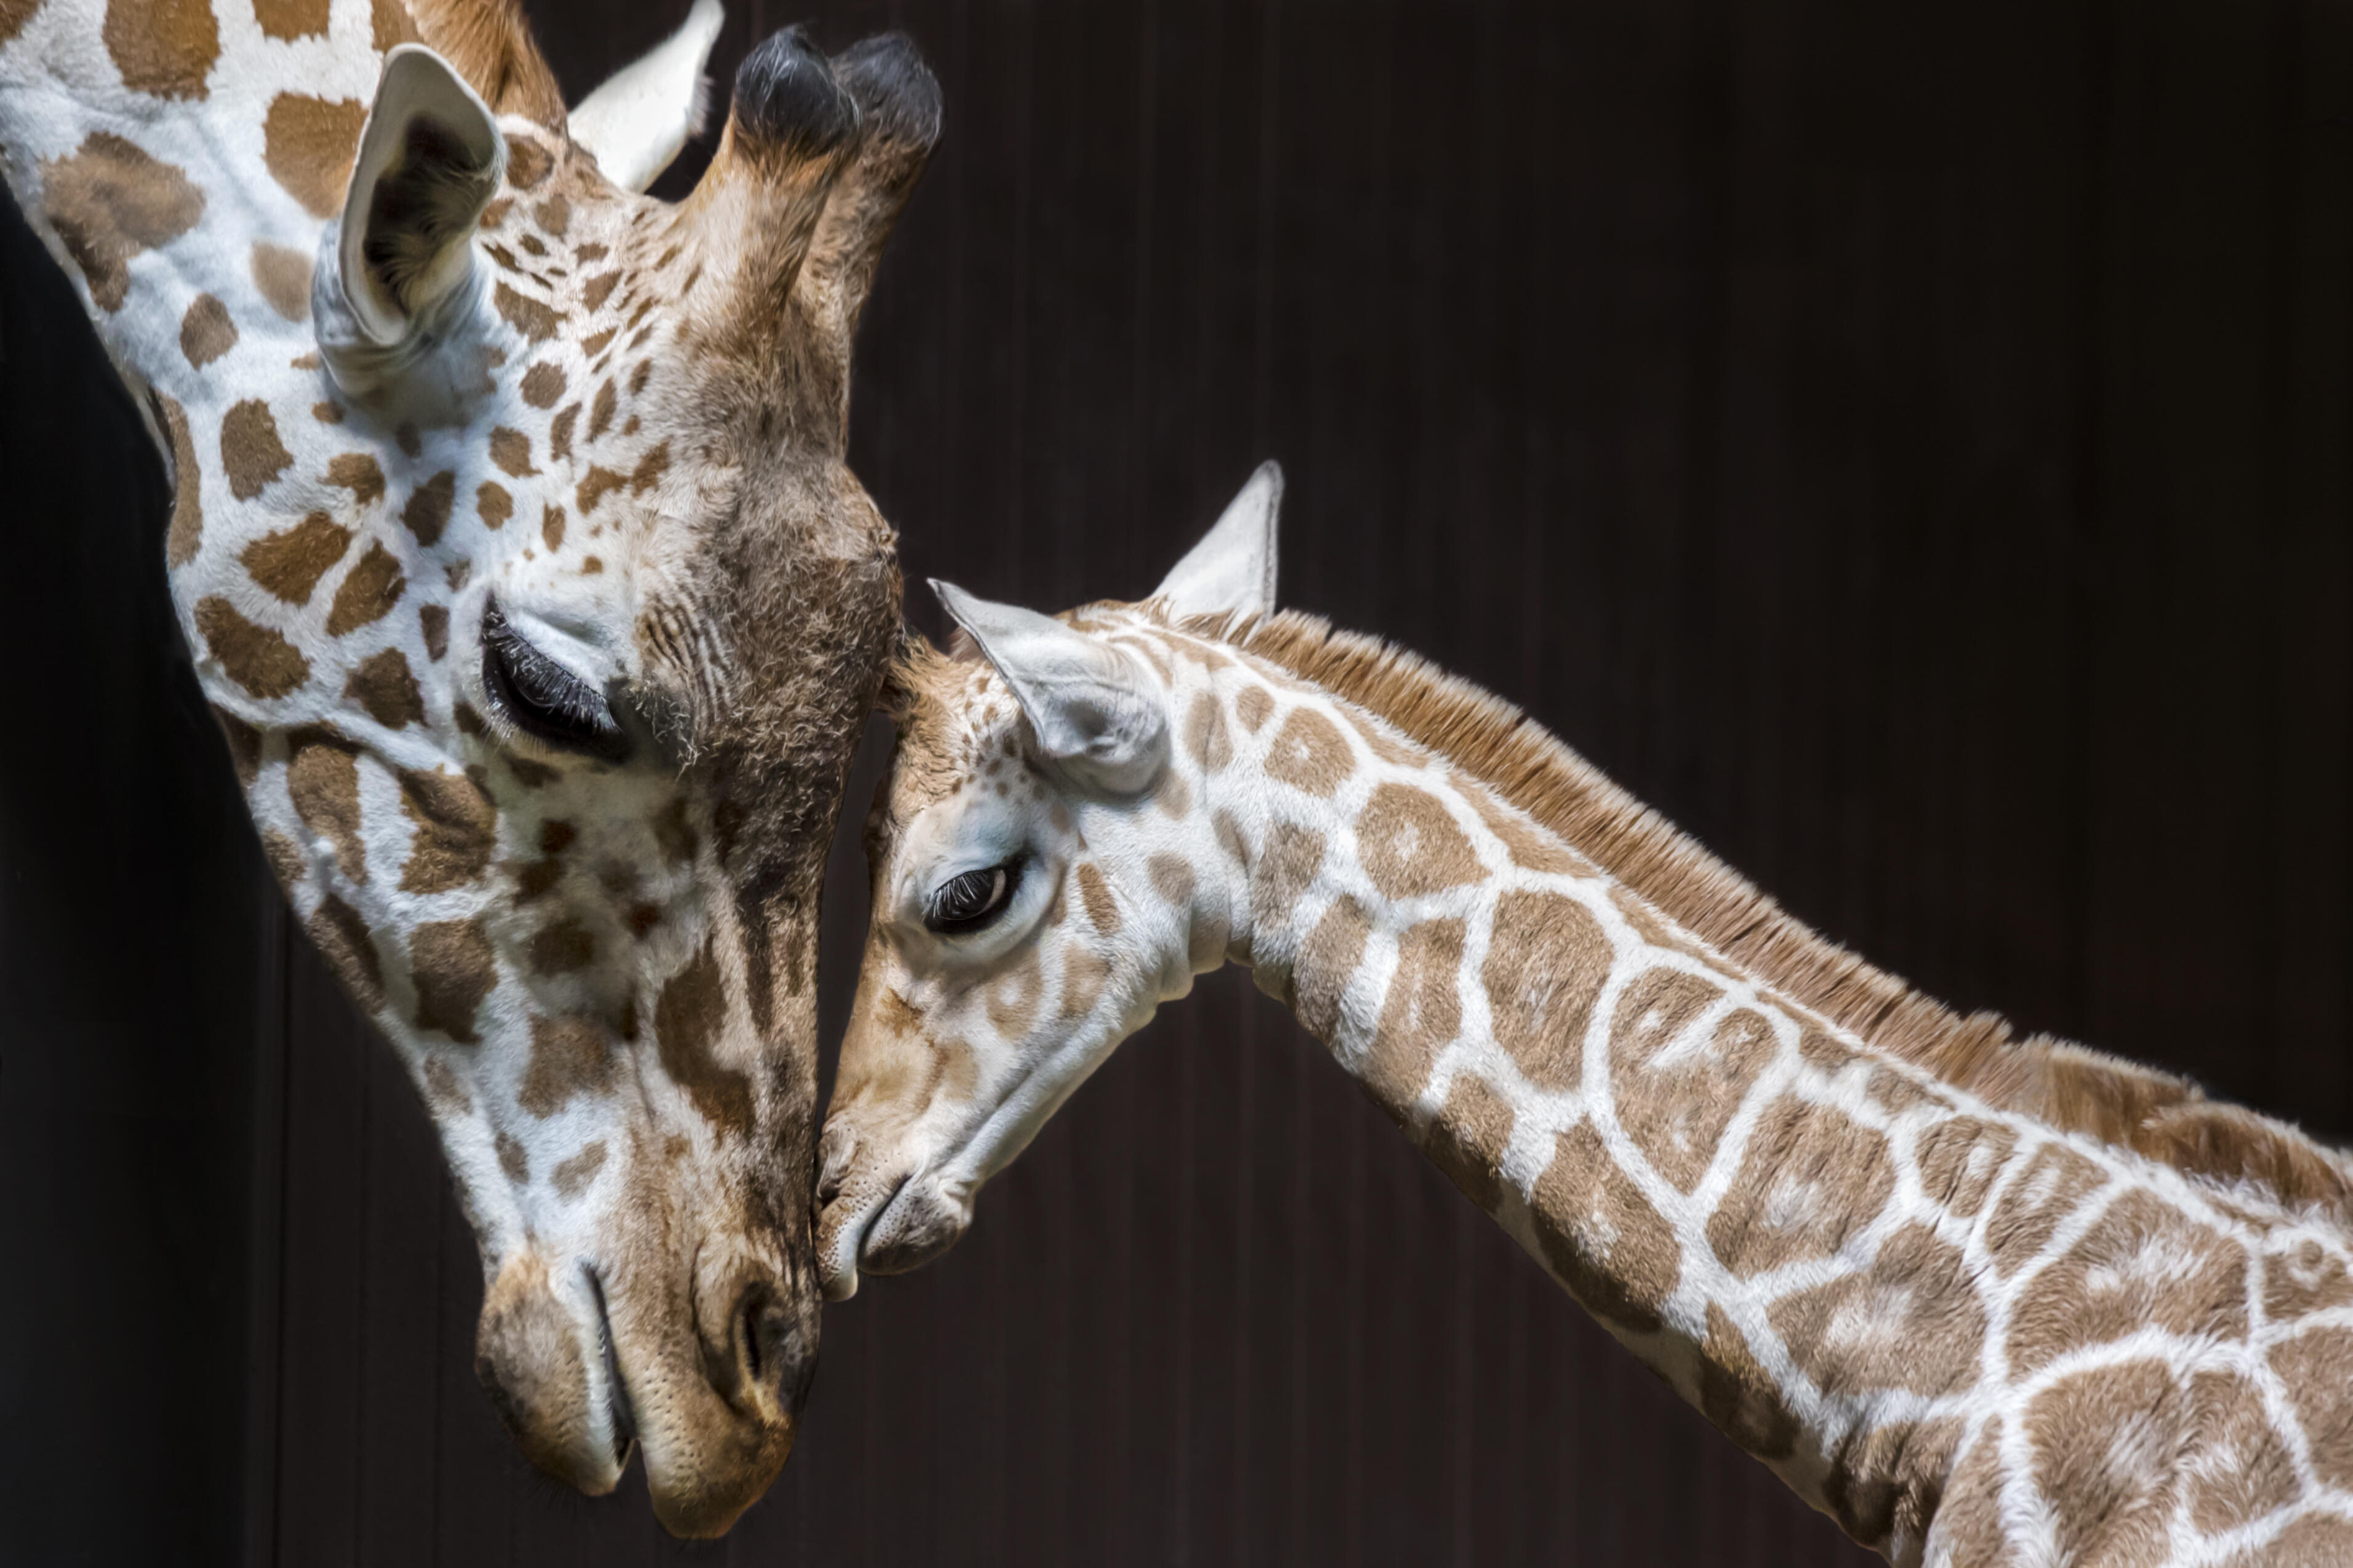 A giraffe baby leaning on his mother